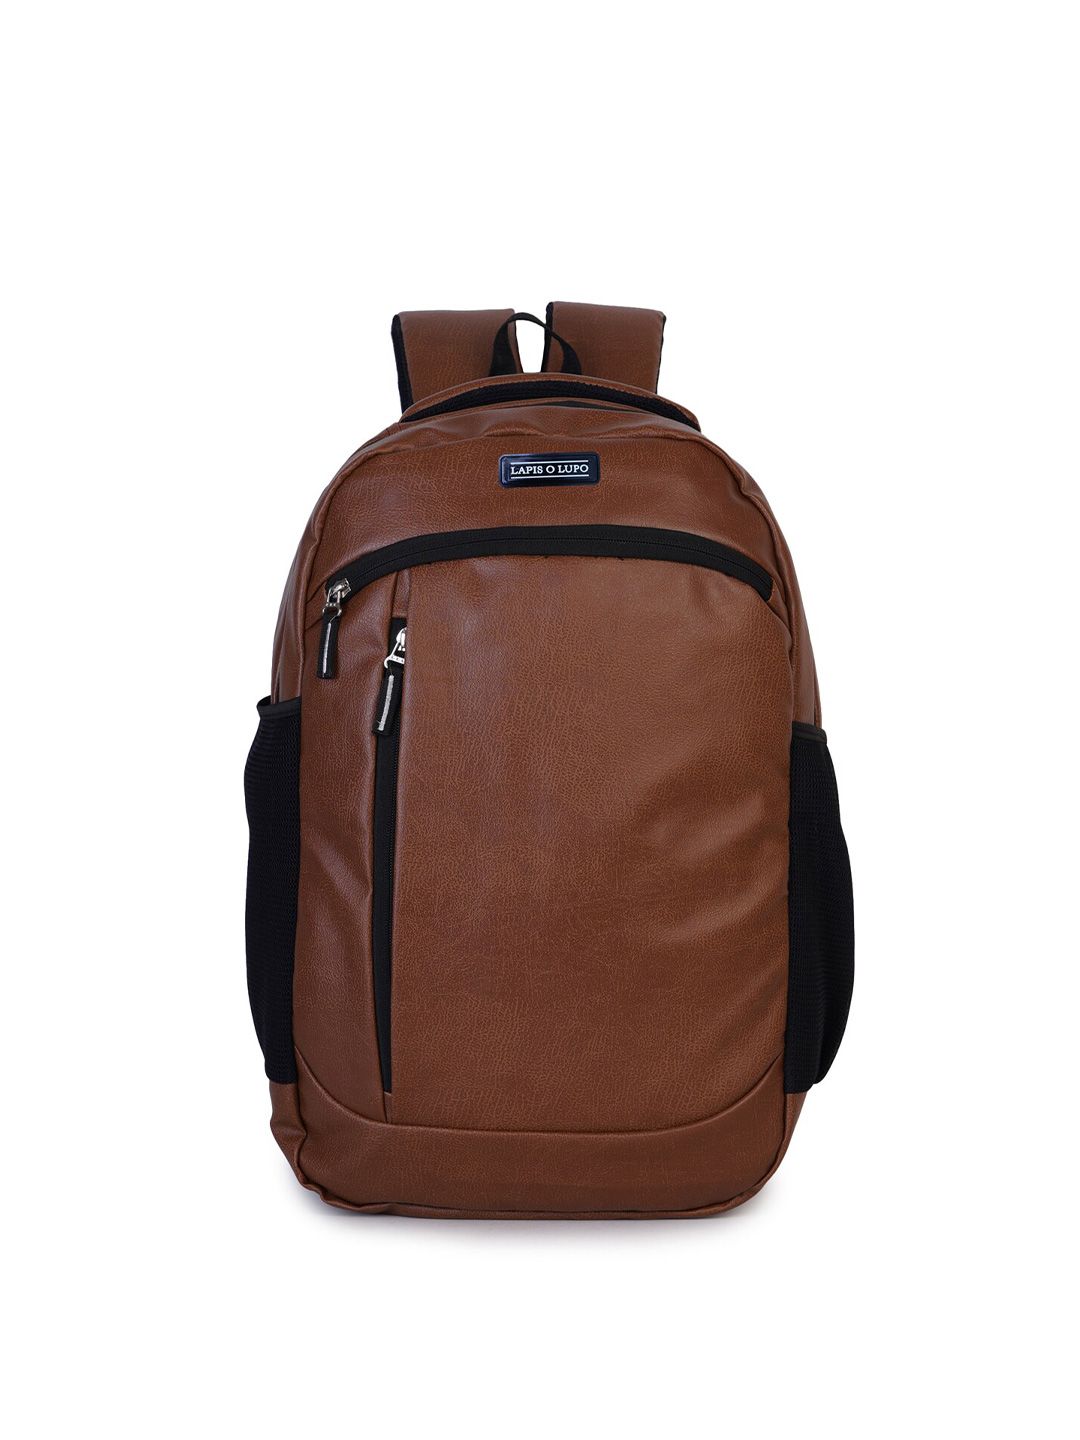 Lapis O Lupo Unisex Tan & Black Solid Backpack with Earphone Gate Price in India